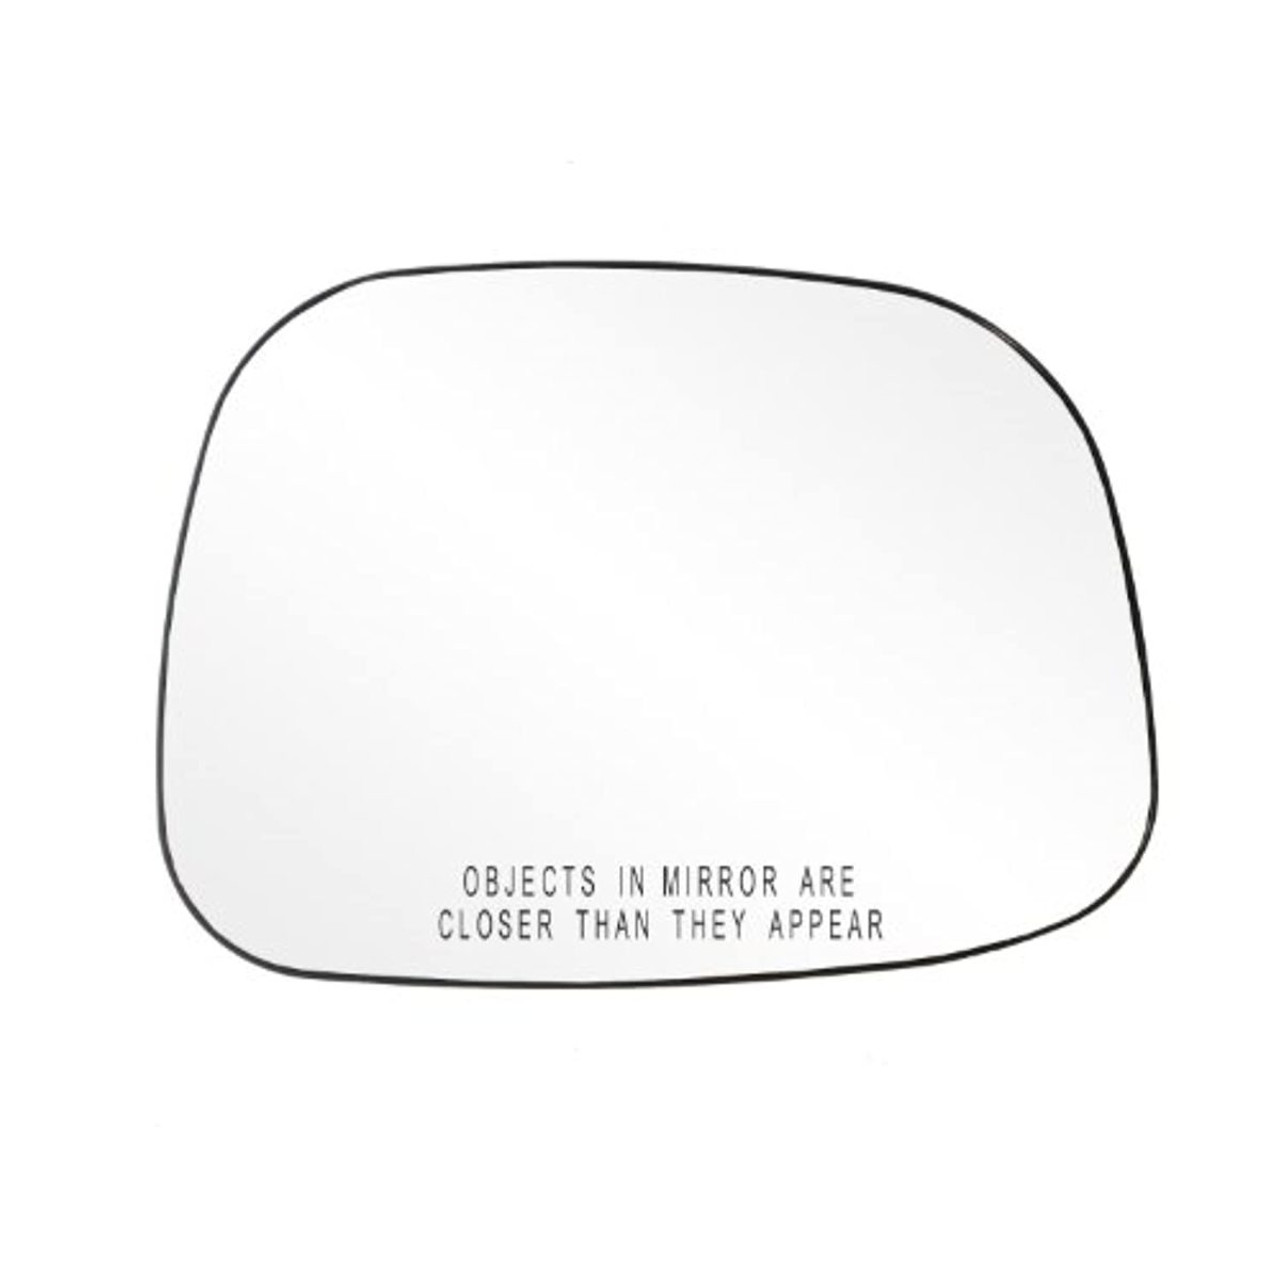 Fit System Passenger Side Heated Mirror Glass w/Backing Plate, Buick Rendezvous, 6 11/16" x 9 1/4" x 9 7/16"